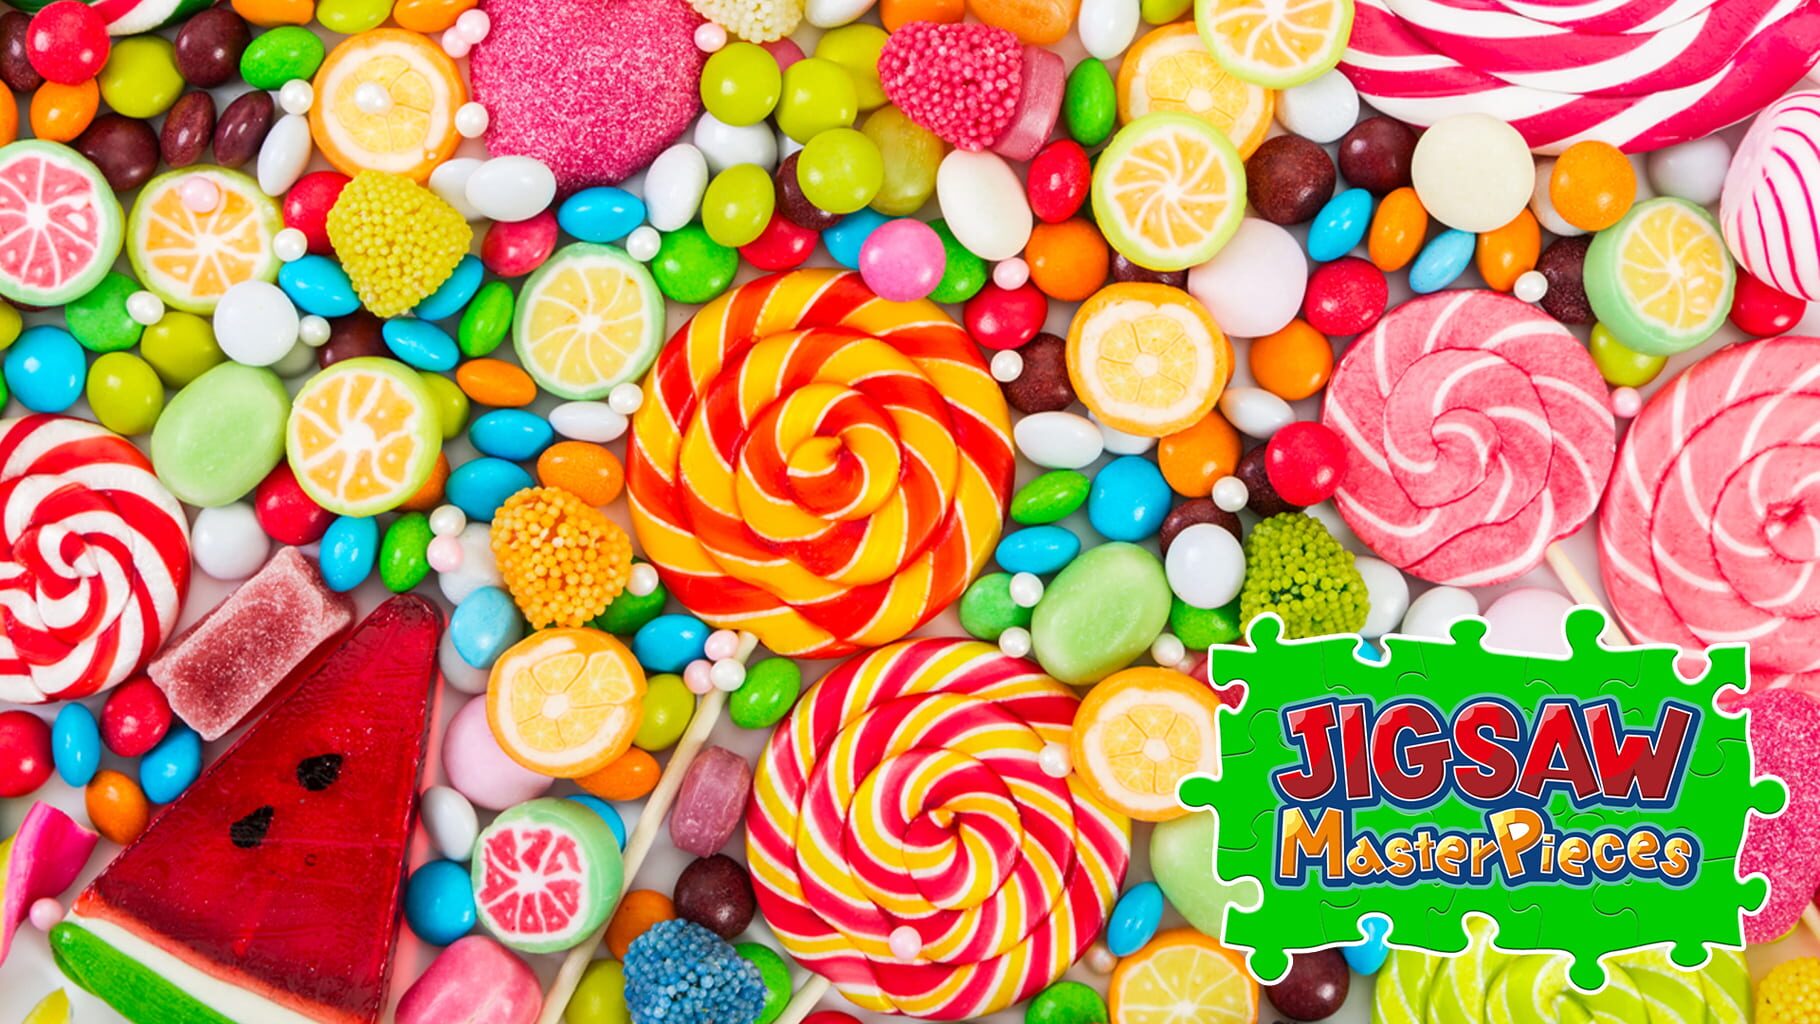 Jigsaw Masterpieces: Colorful Sweets artwork